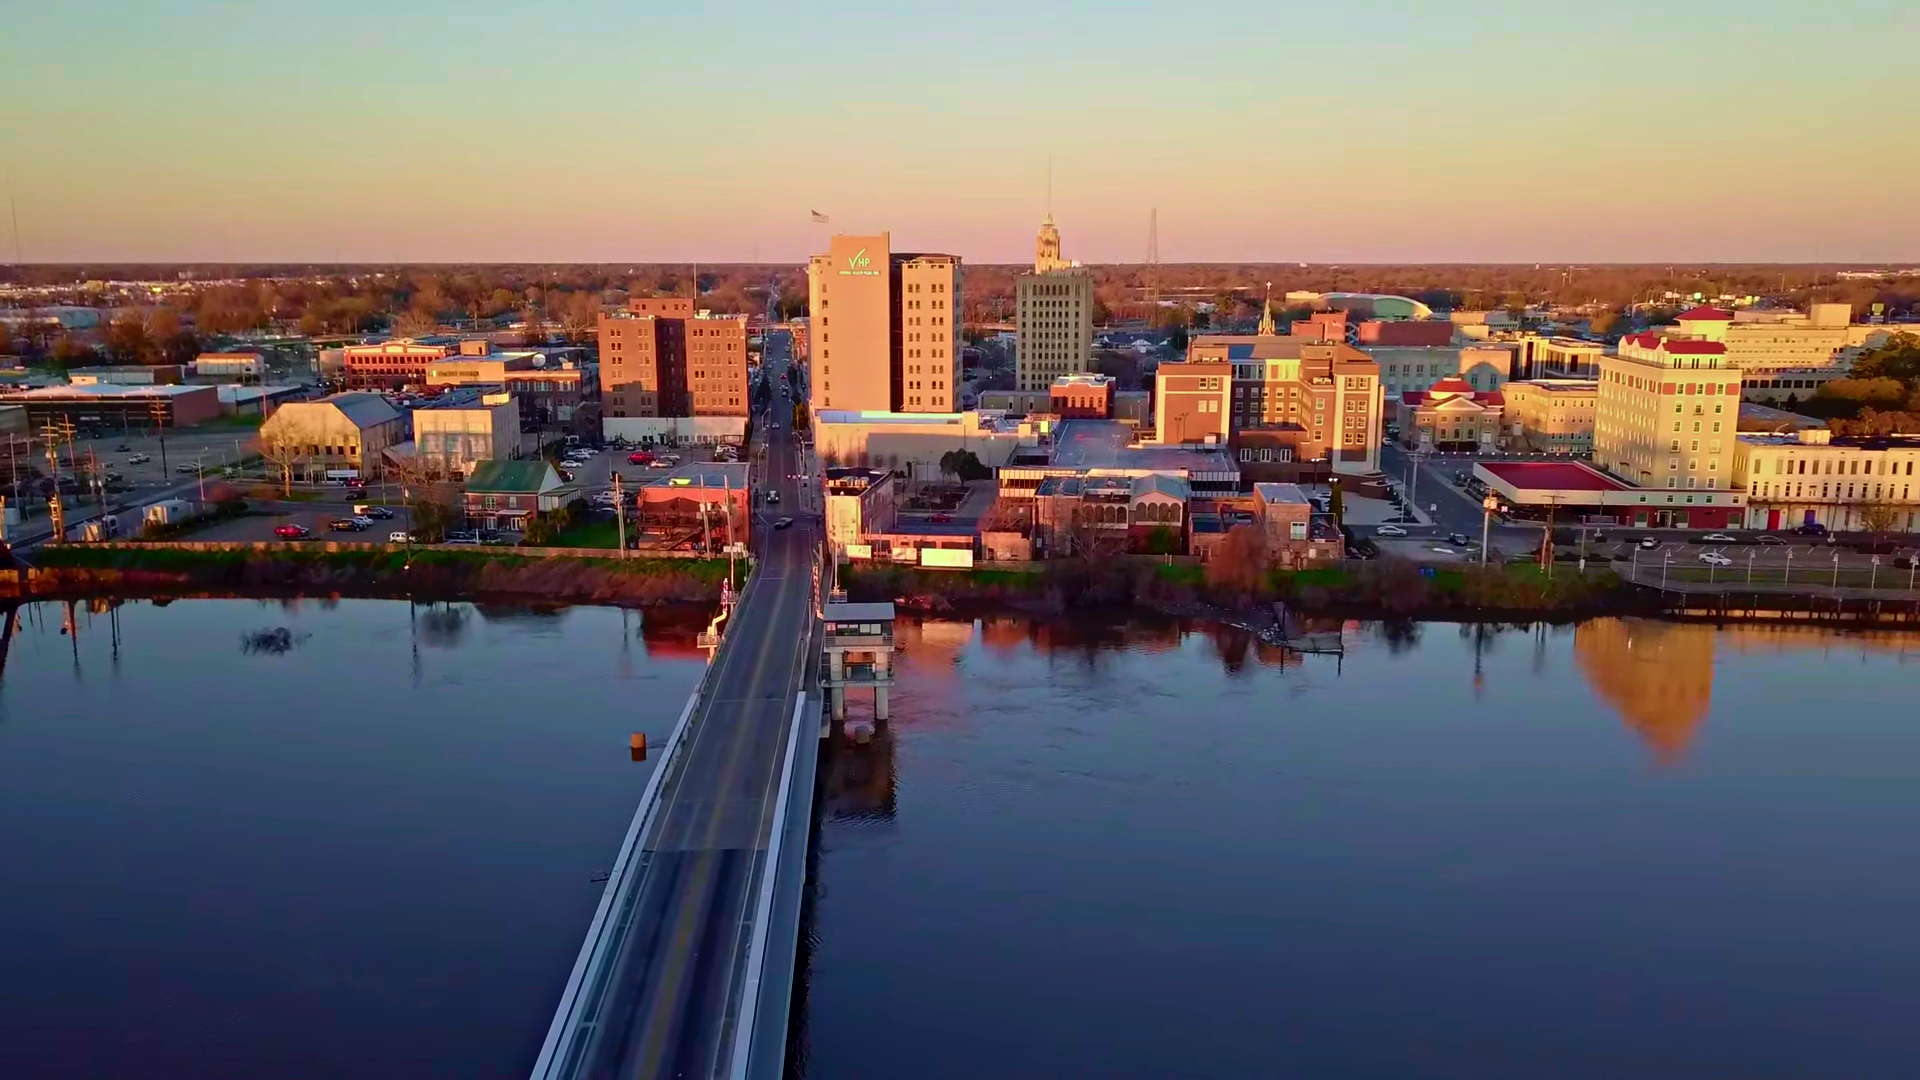 Monroe is the eighth-largest city in the U.S. state of Louisiana, and parish seat of Ouachita Parish. With a 2020 census-tabulated population of 47,702, it is the principal city of the Monroe metropolitan statistical area, the second-largest metropolitan area in North Louisiana.